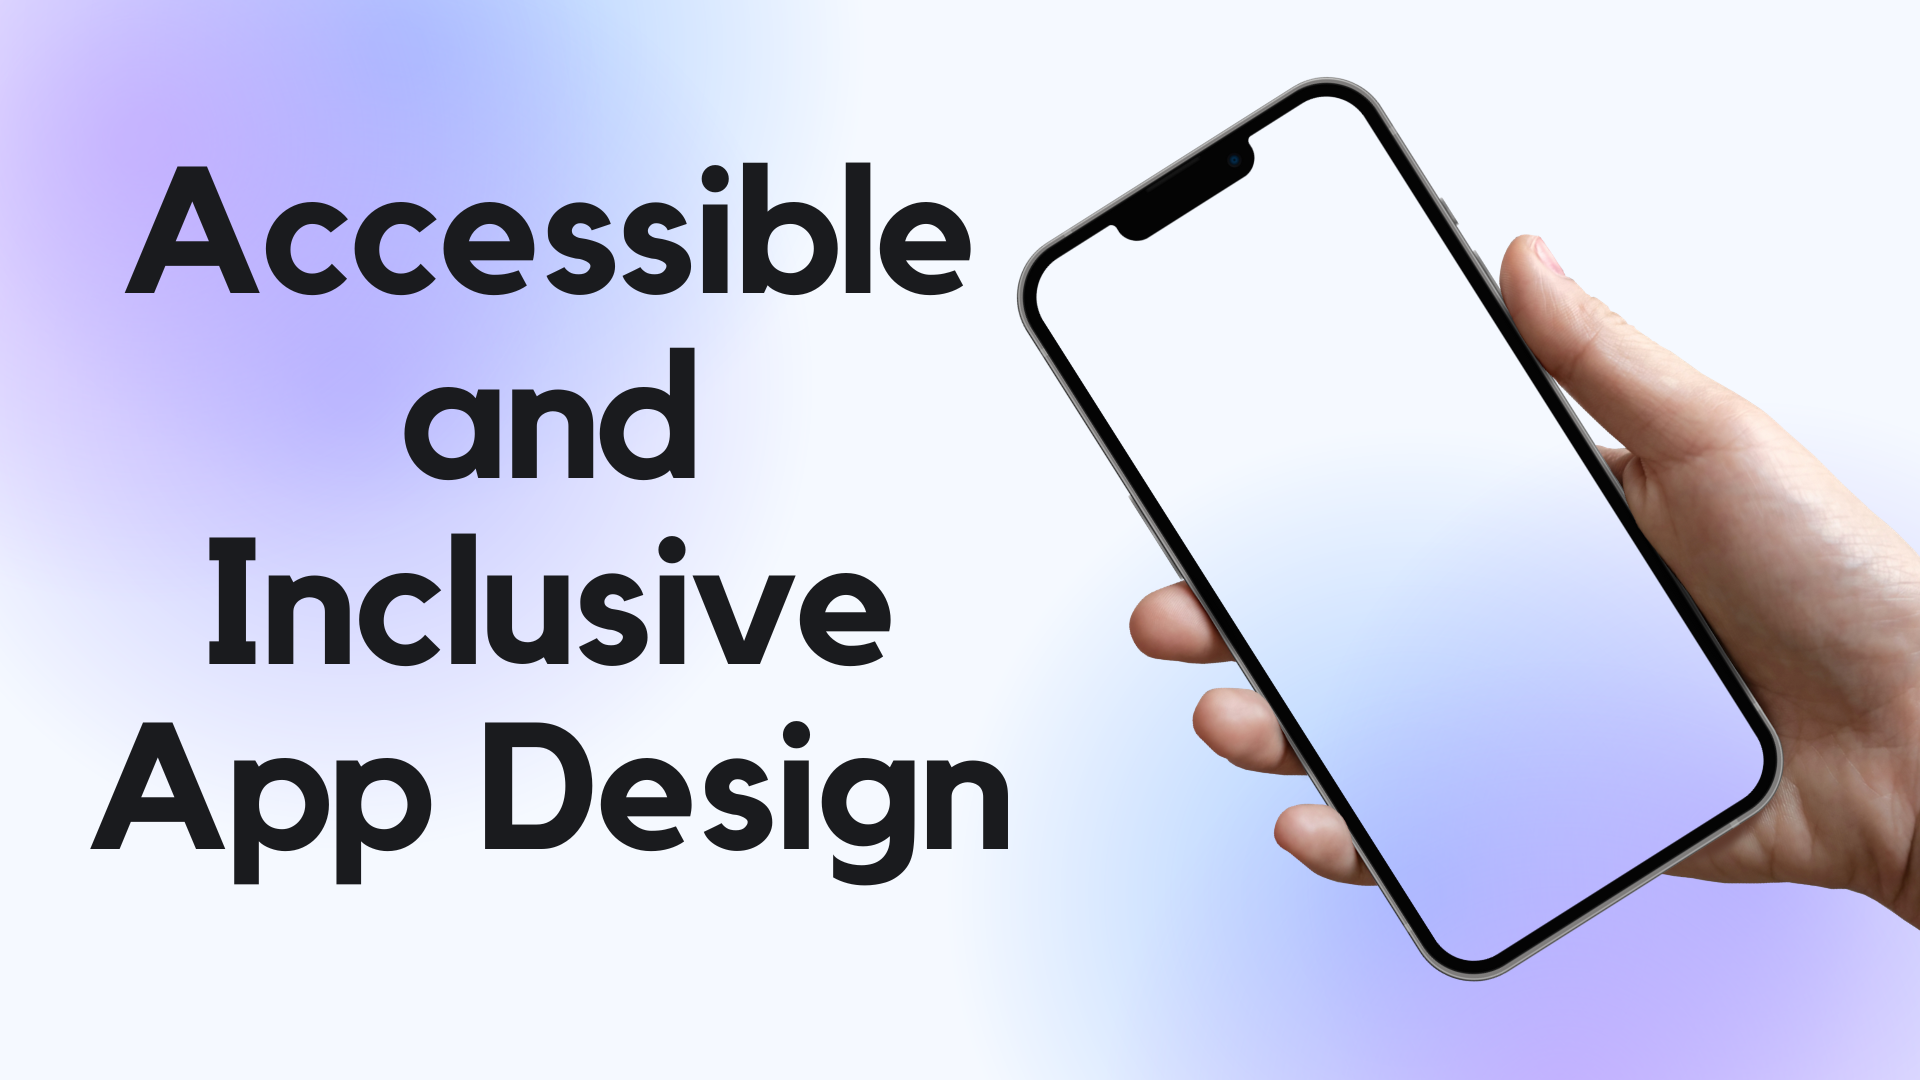 Accessible and Inclusive App Design